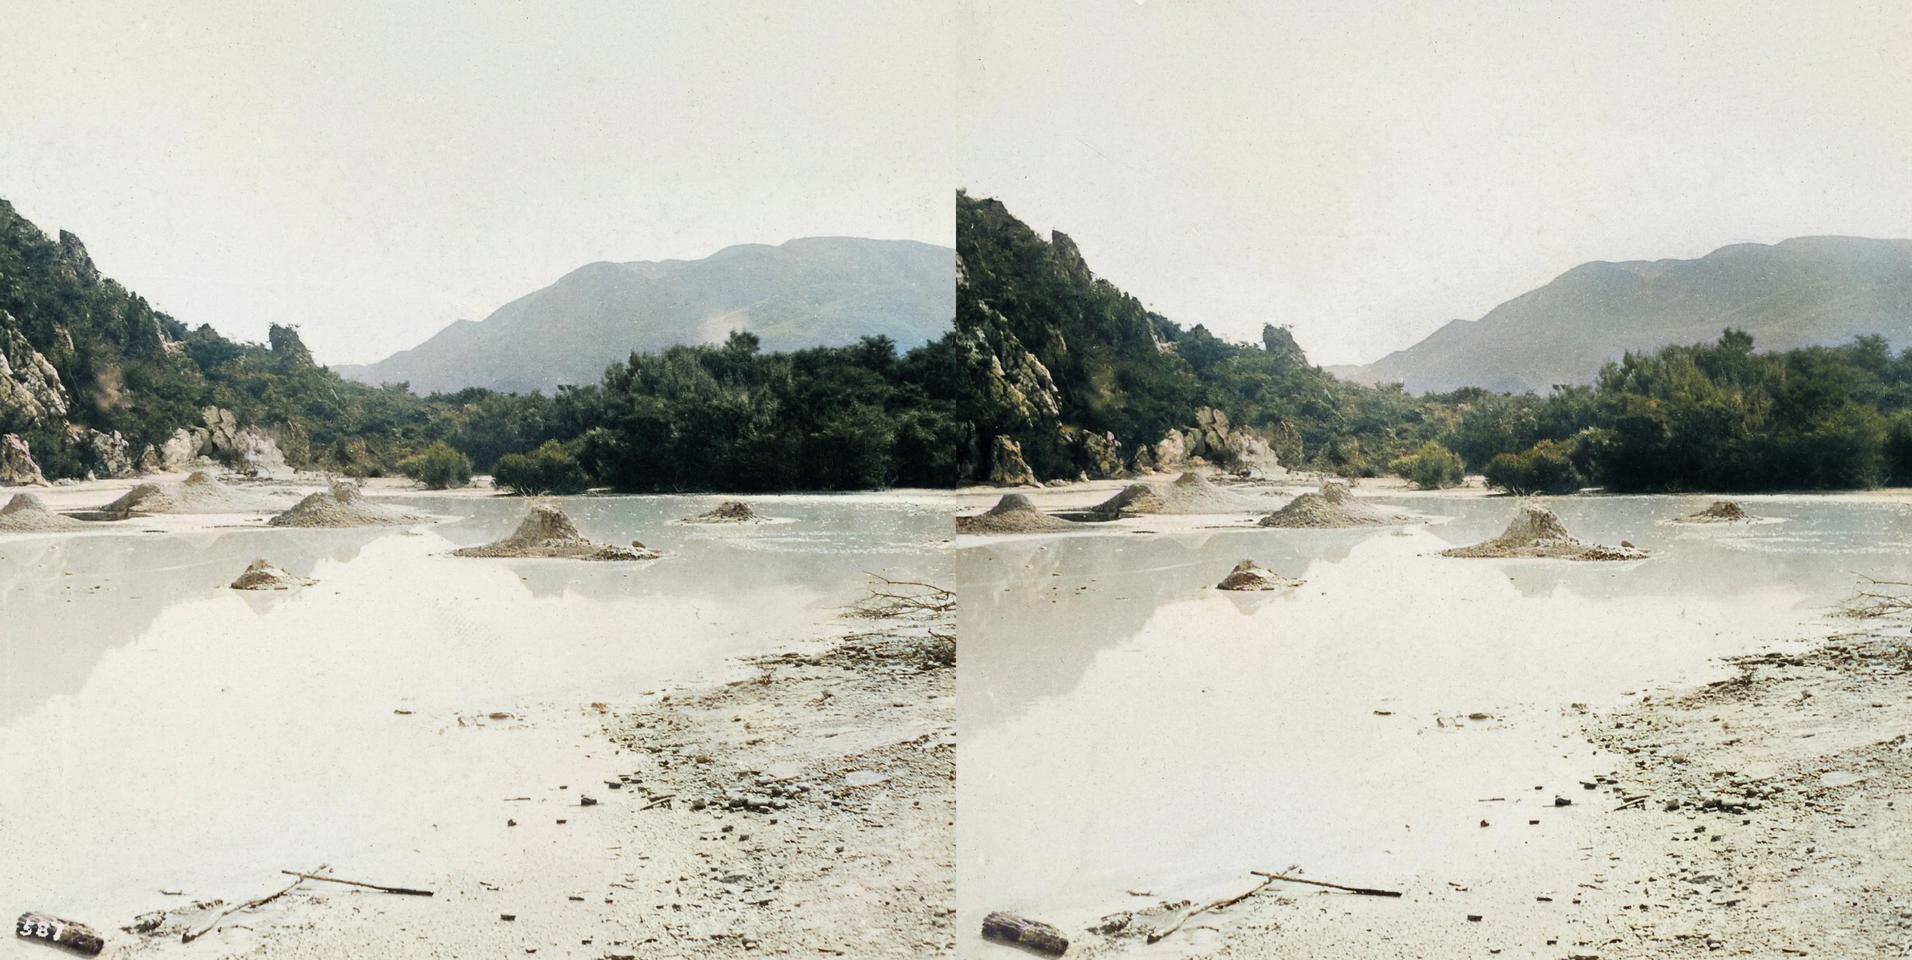 ‘Mud volcano Rotokanapanapa Hot Springs, circa 1880 - area of Pink and White Terraces (destroyed in 1886 eruption)’